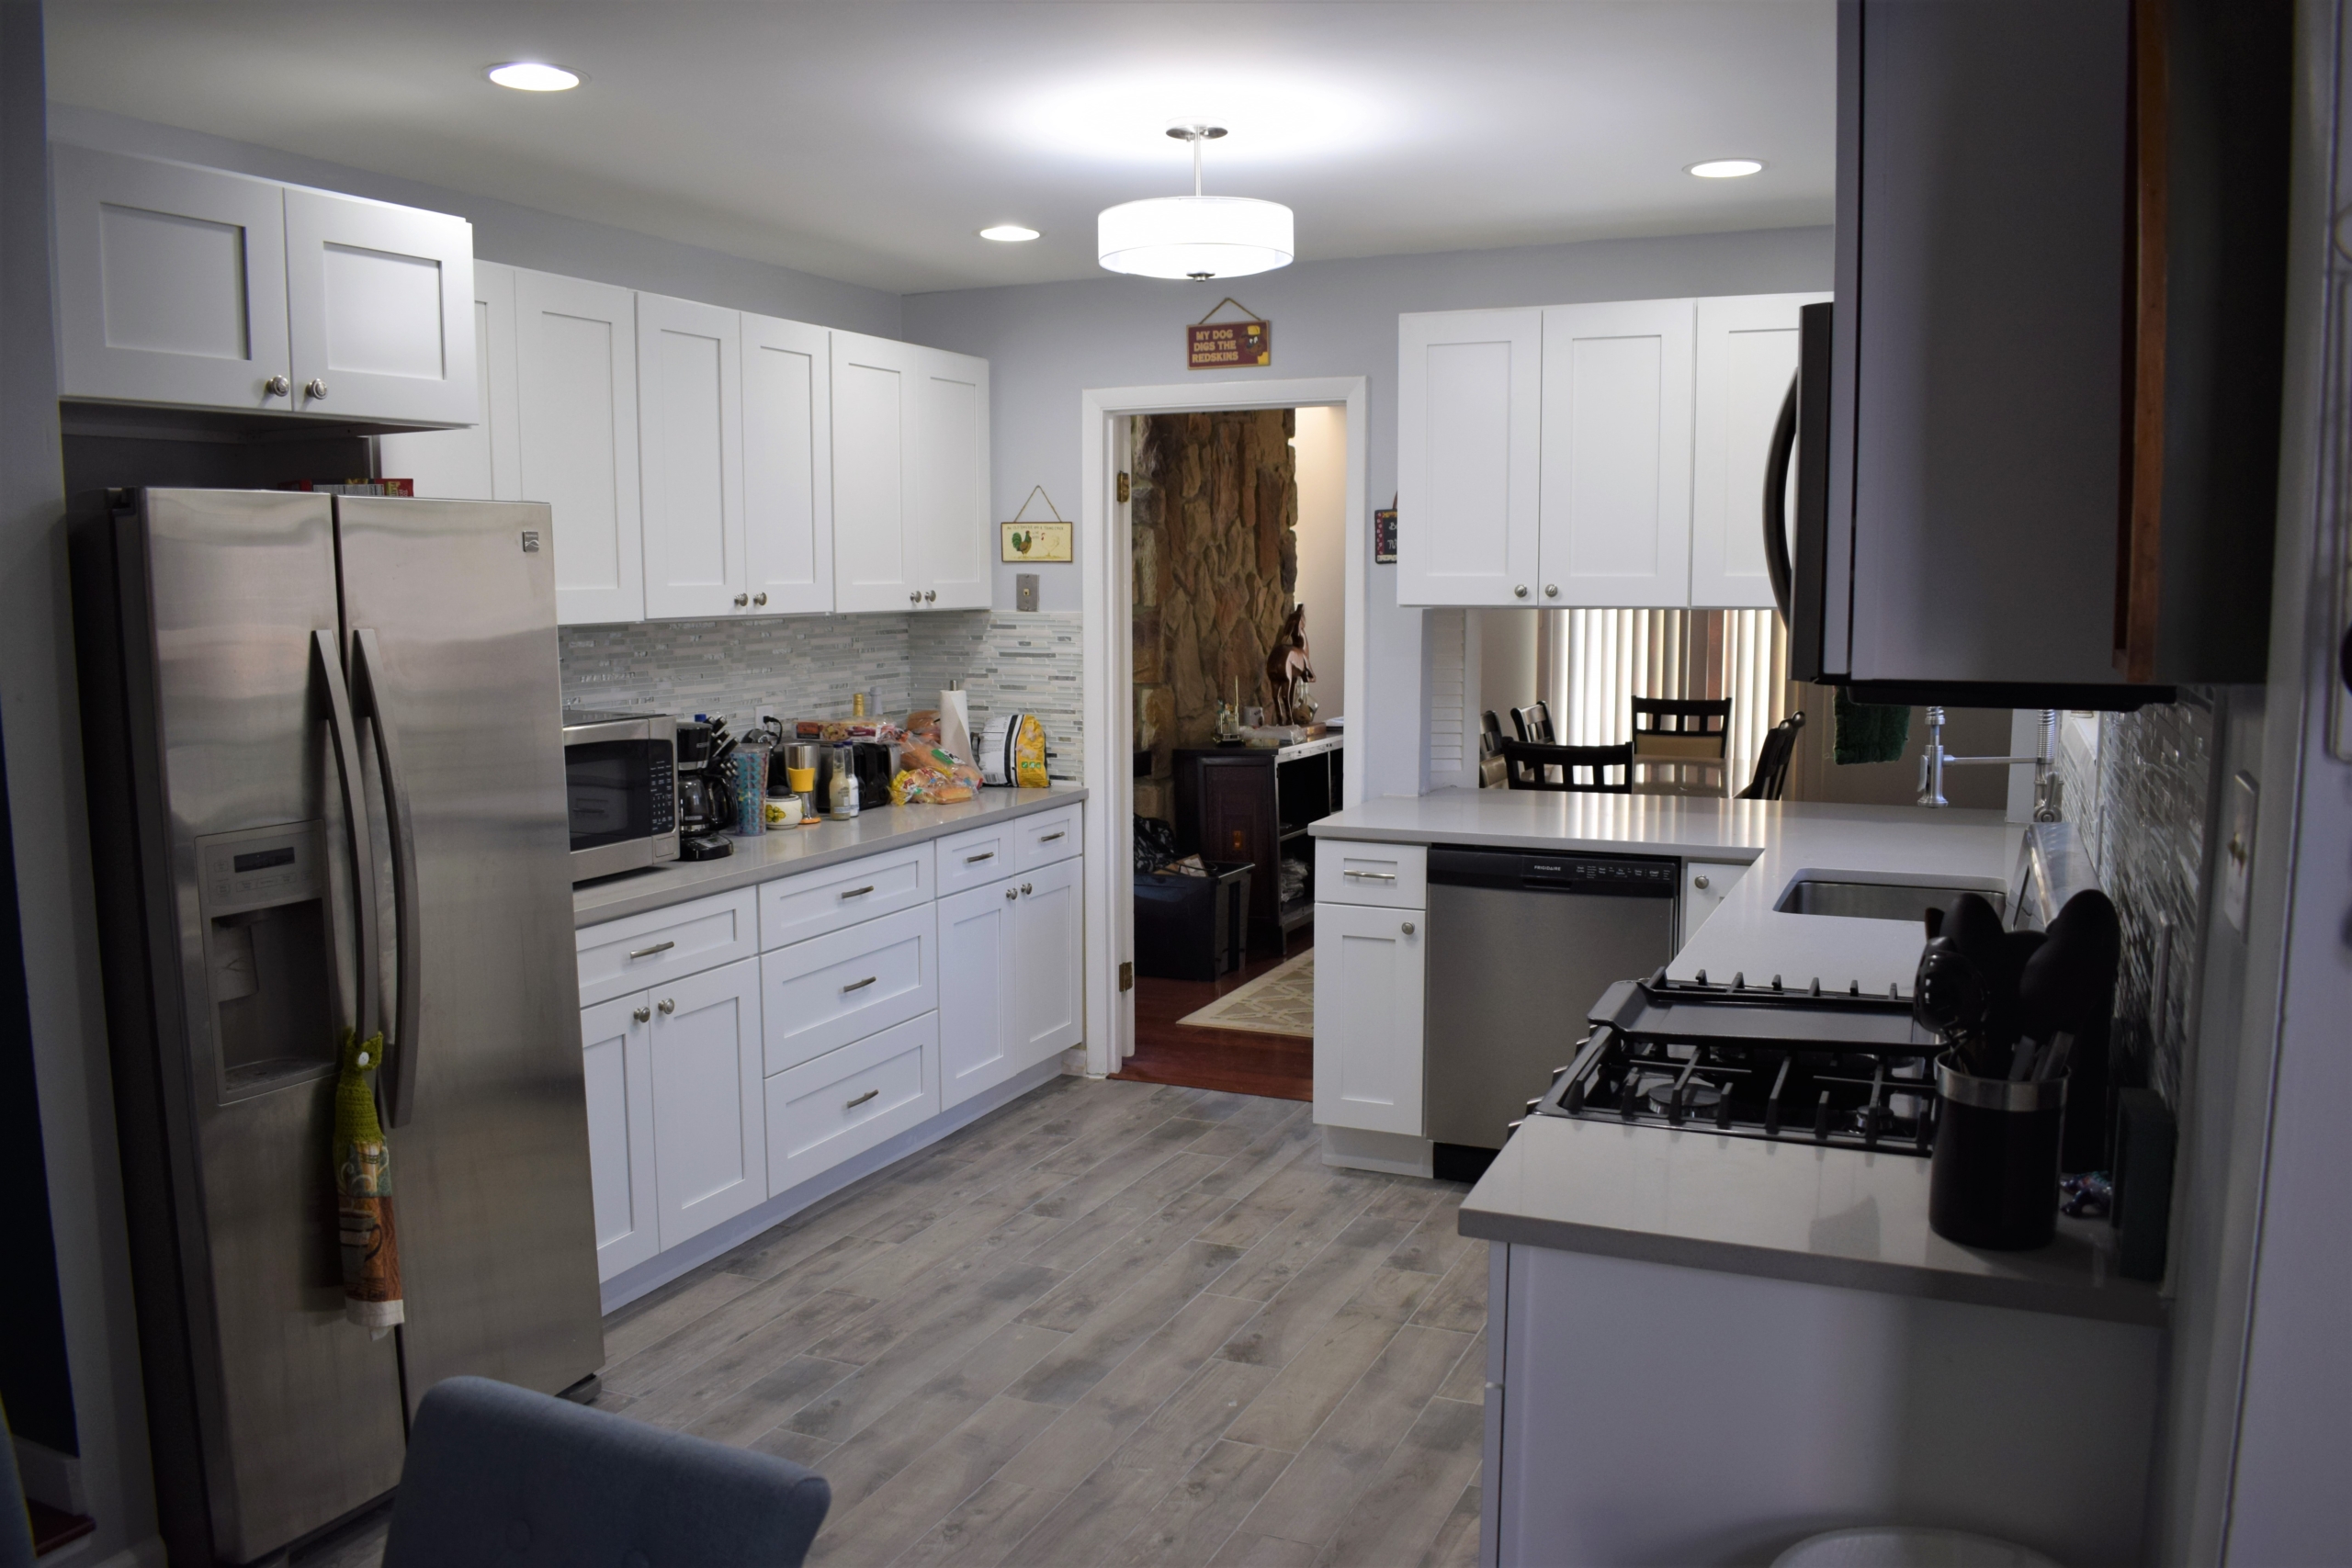 Kitchen Remodel Cost in Maryland